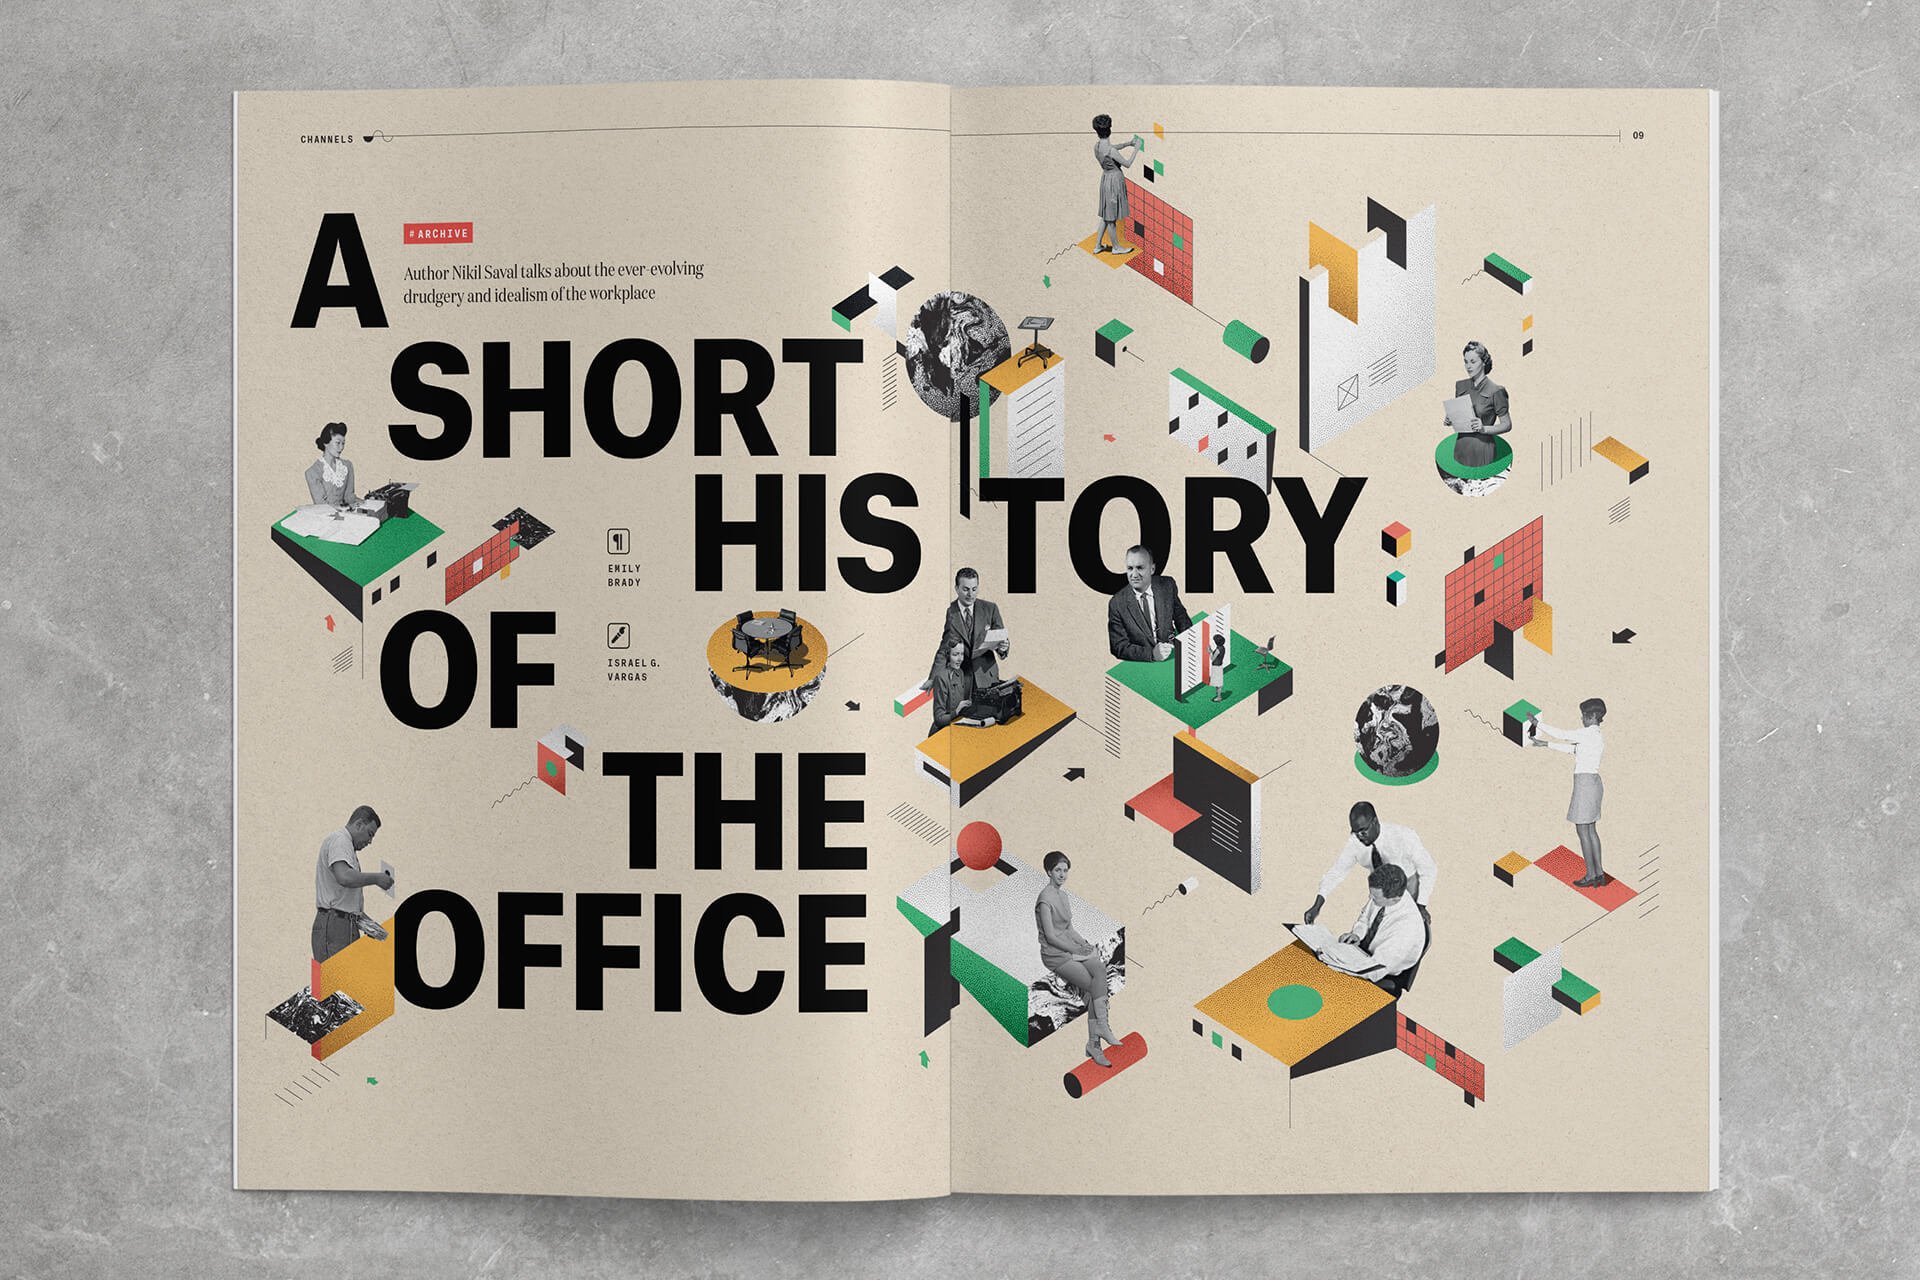 A short history of the office